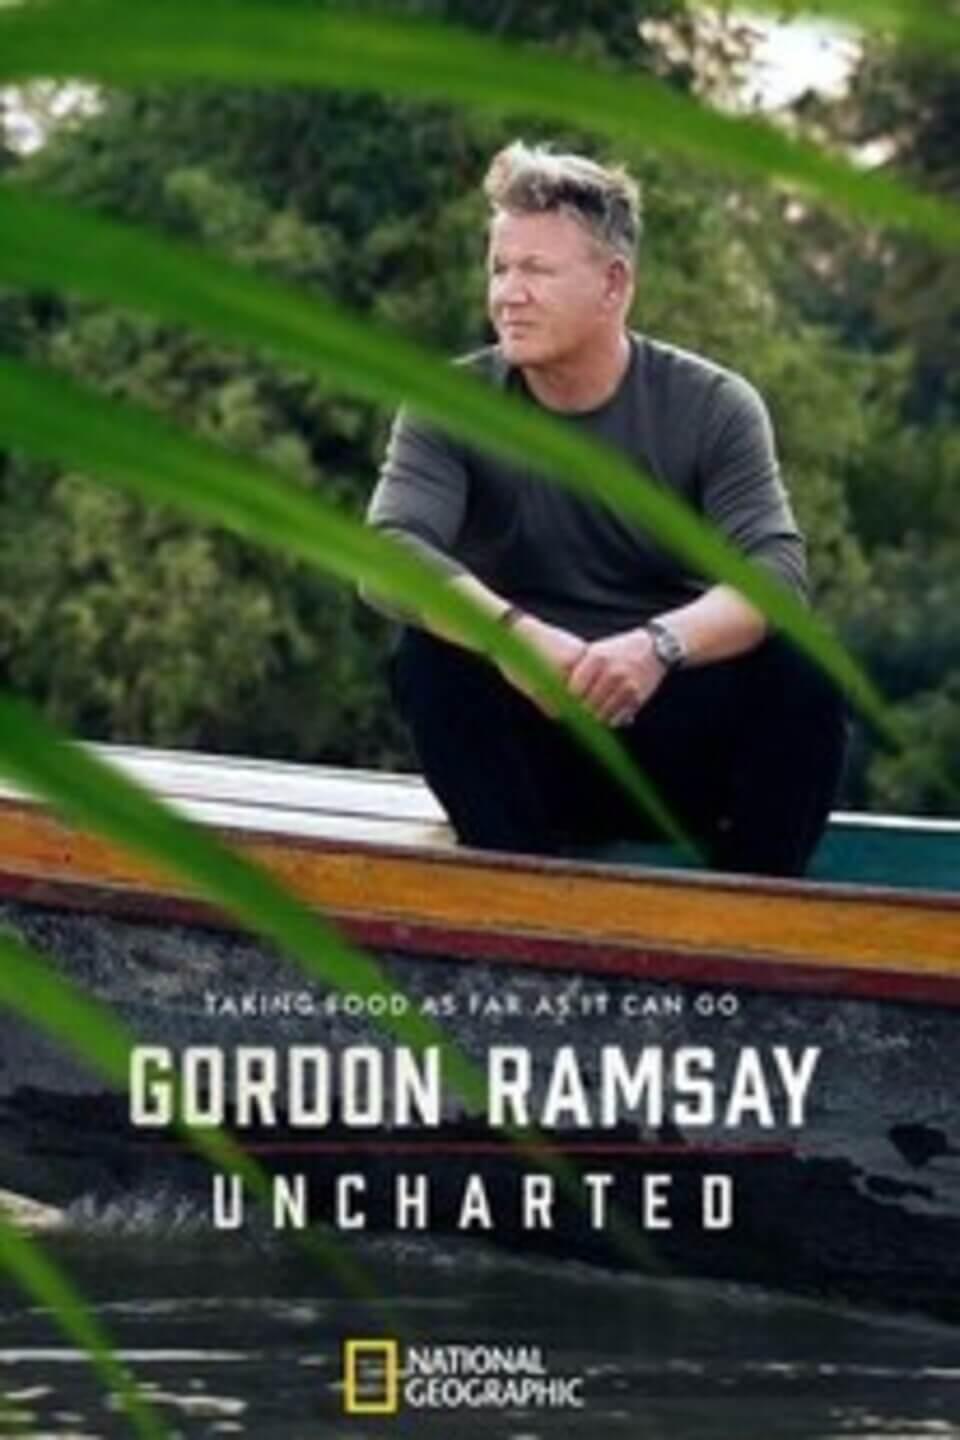 TV ratings for Gordon Ramsay: Uncharted Showdown in Irlanda. National Geographic TV series